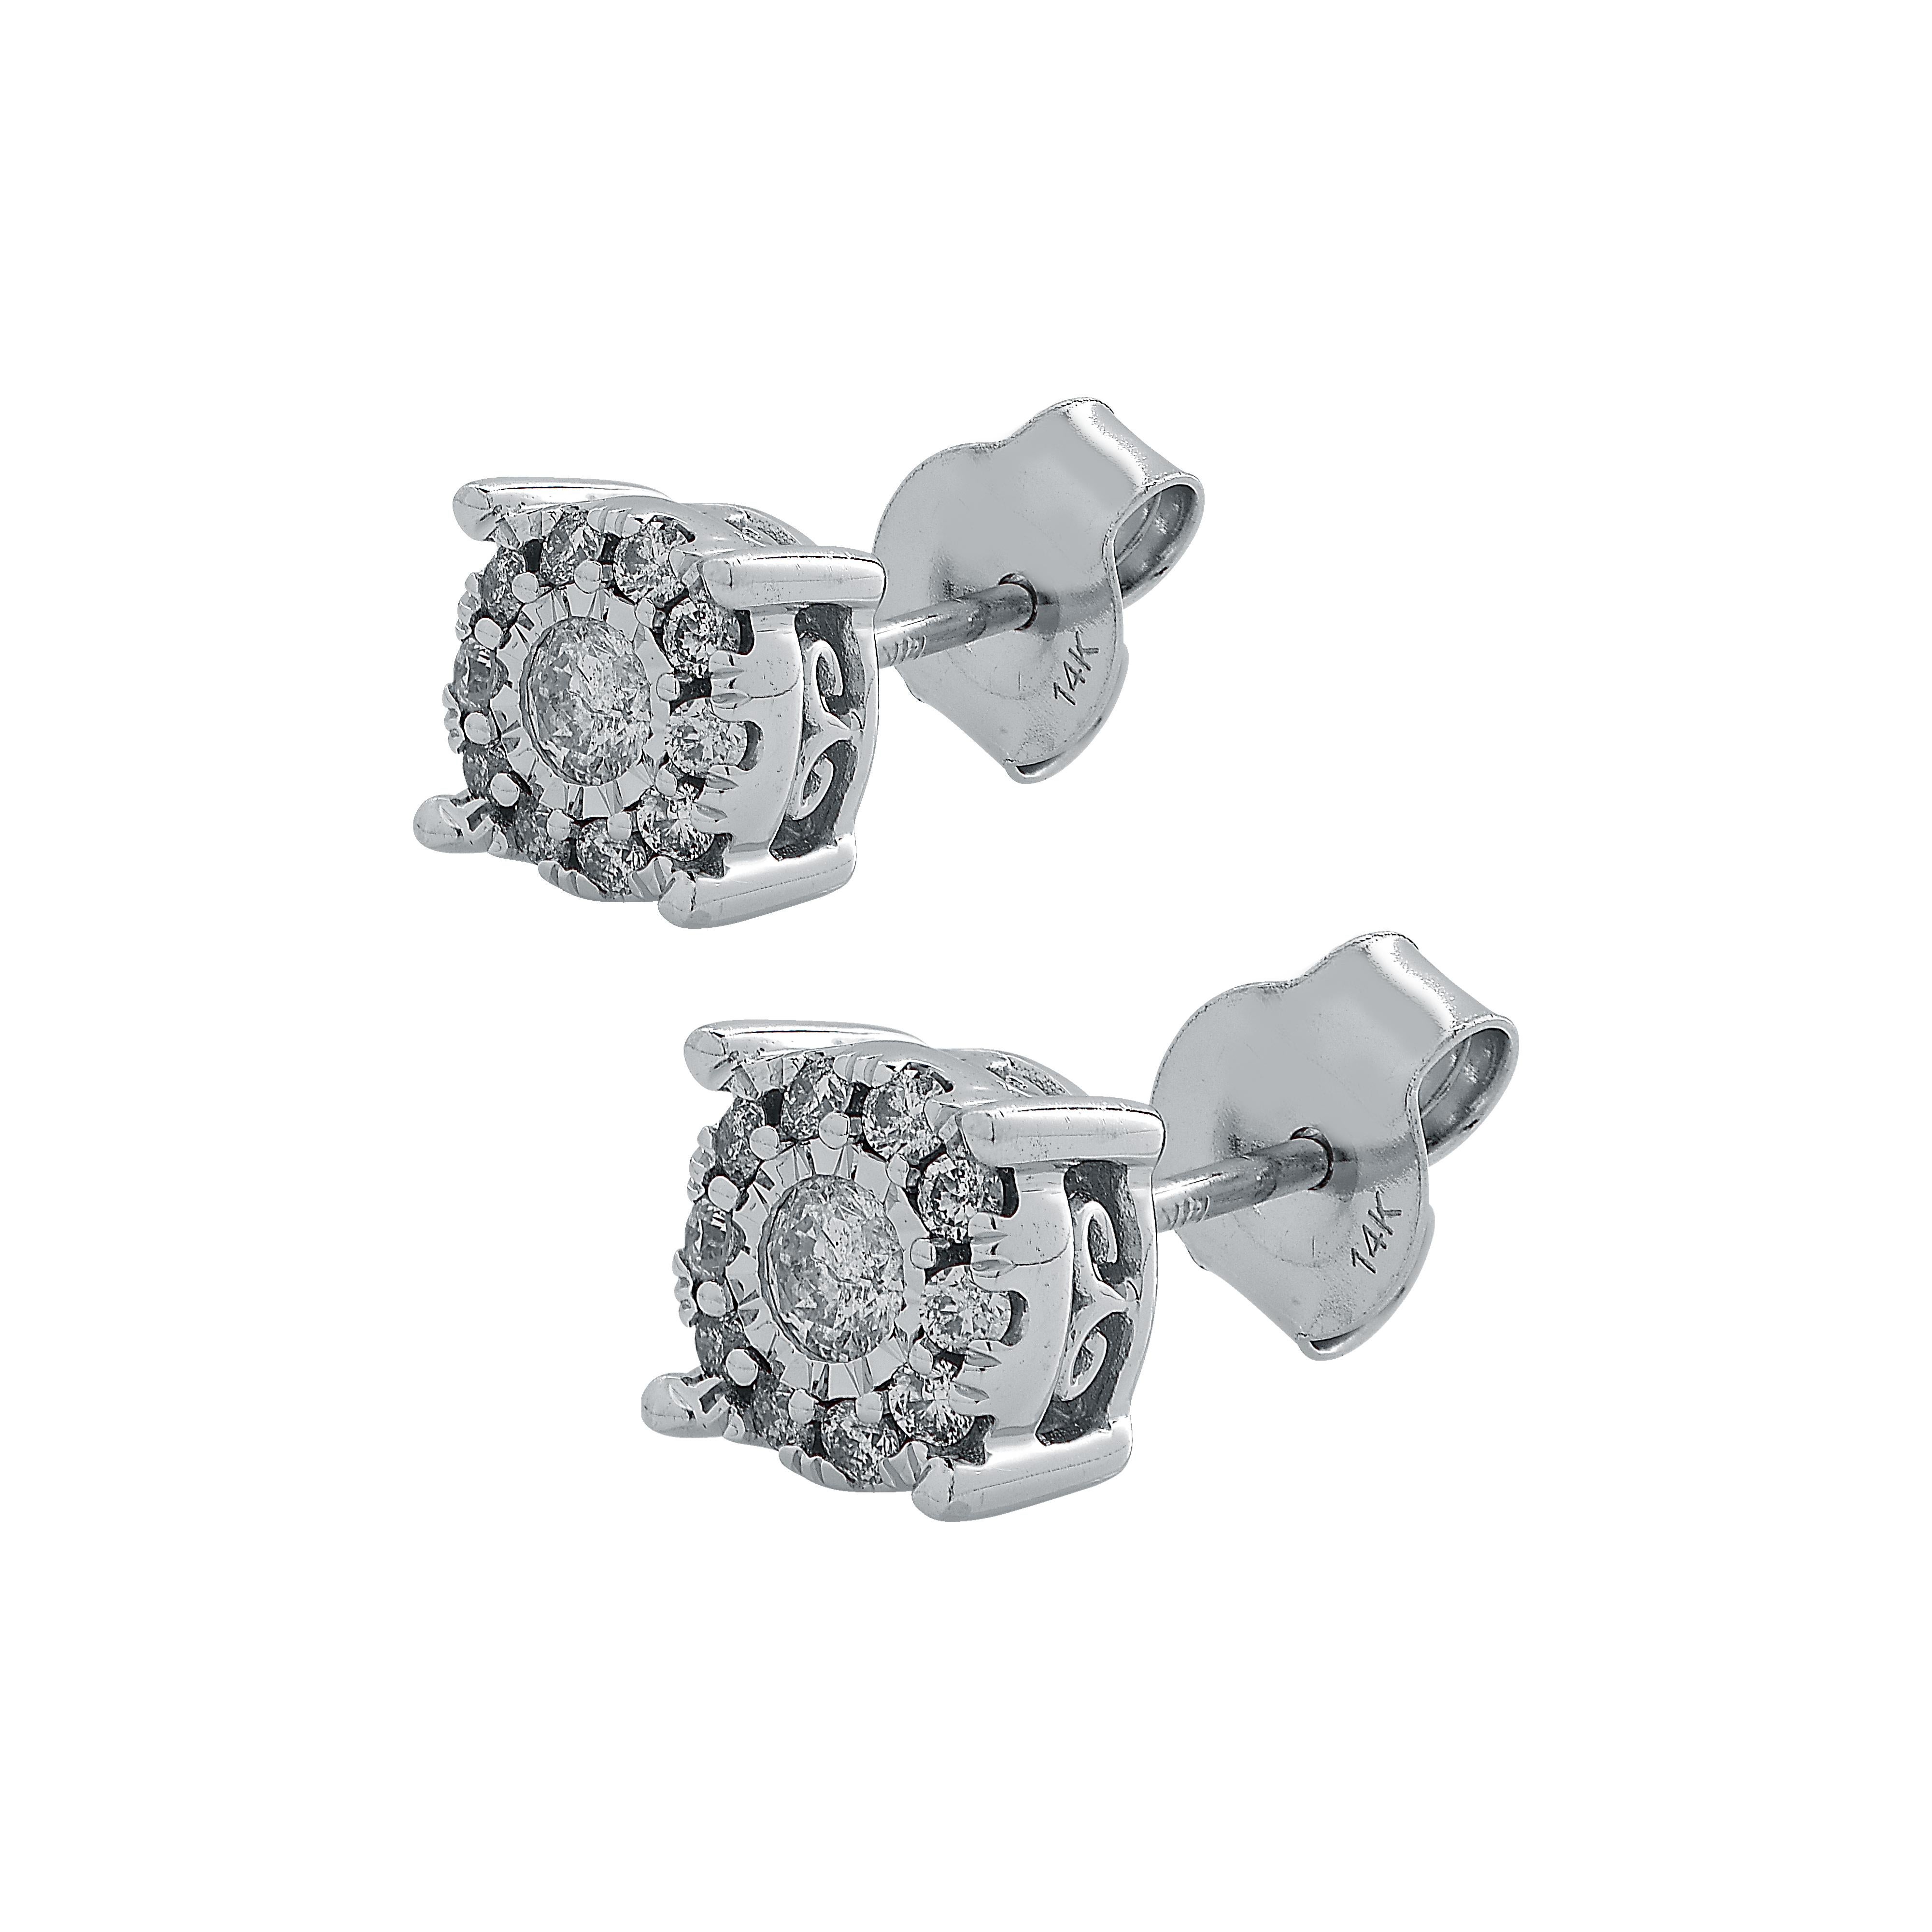 Stunning earrings crafted in white gold, featuring 22 round brilliant cut diamonds weighing approximately .50 carats total, G color SI2-3 clarity, seamlessly cluster set to create a big look. These gorgeous earrings measure 6.5 mm in diameter.

Our